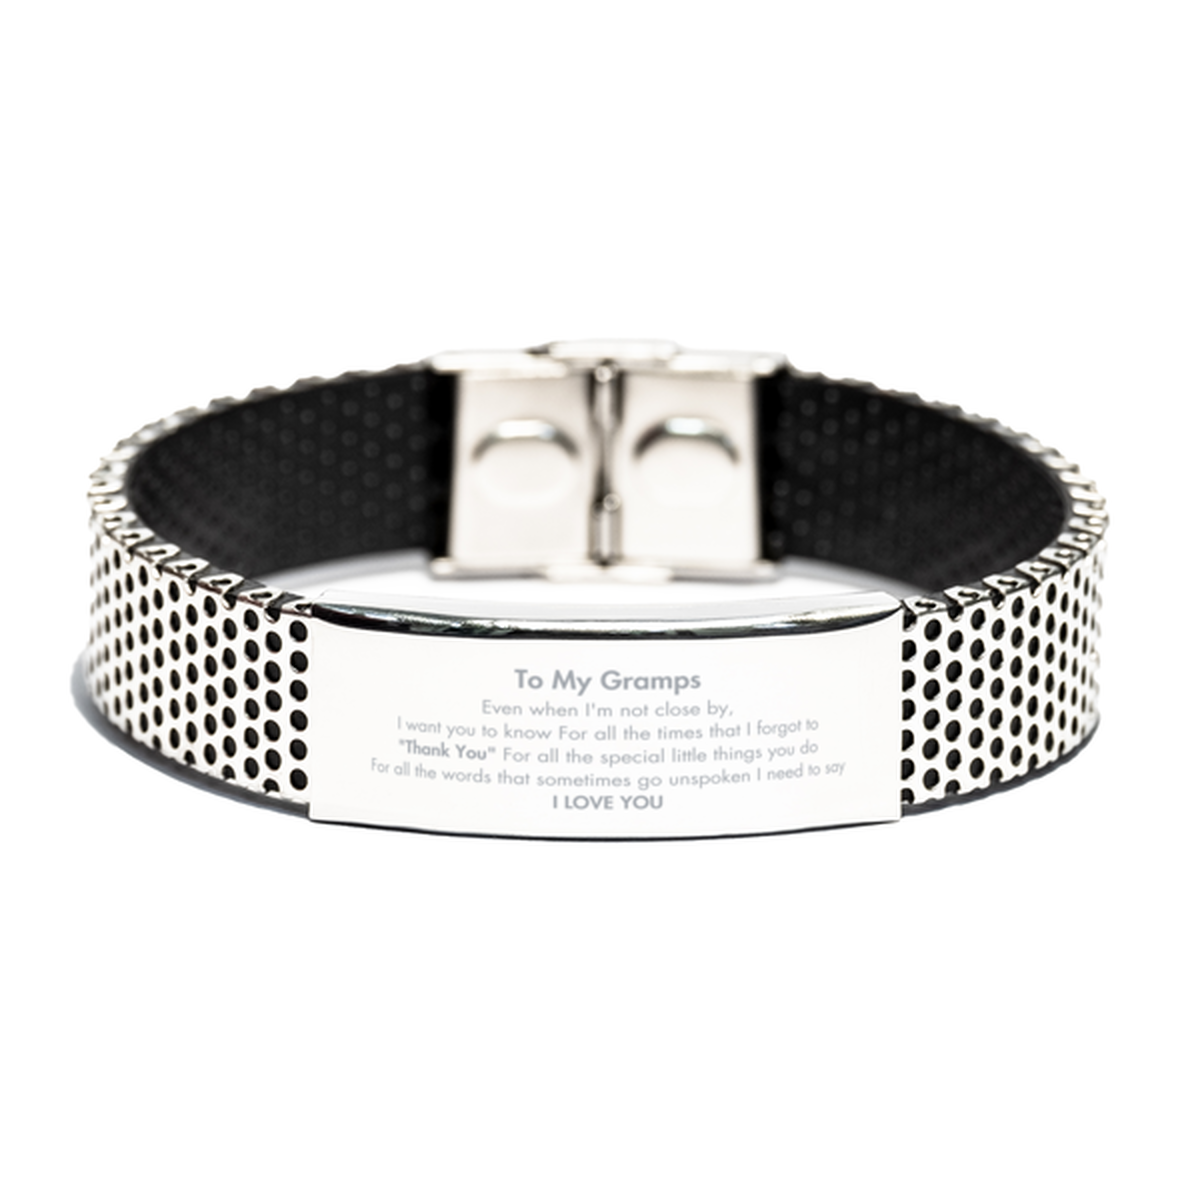 Thank You Gifts for Gramps, Keepsake Stainless Steel Bracelet Gifts for Gramps Birthday Mother's day Father's Day Gramps For all the words That sometimes go unspoken I need to say I LOVE YOU